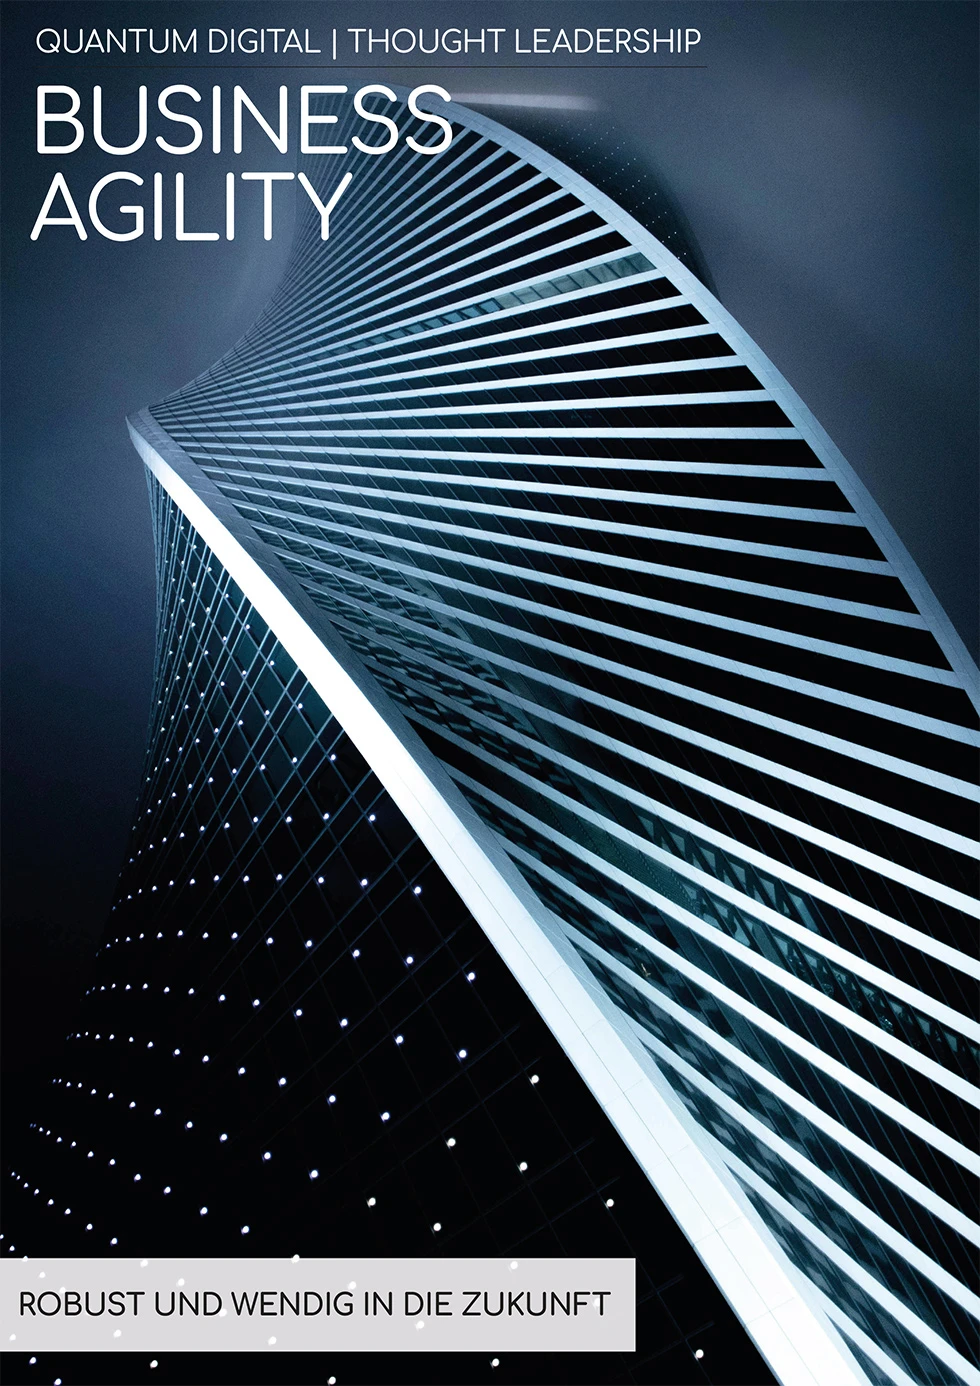 Thought Leadership | Business Agility